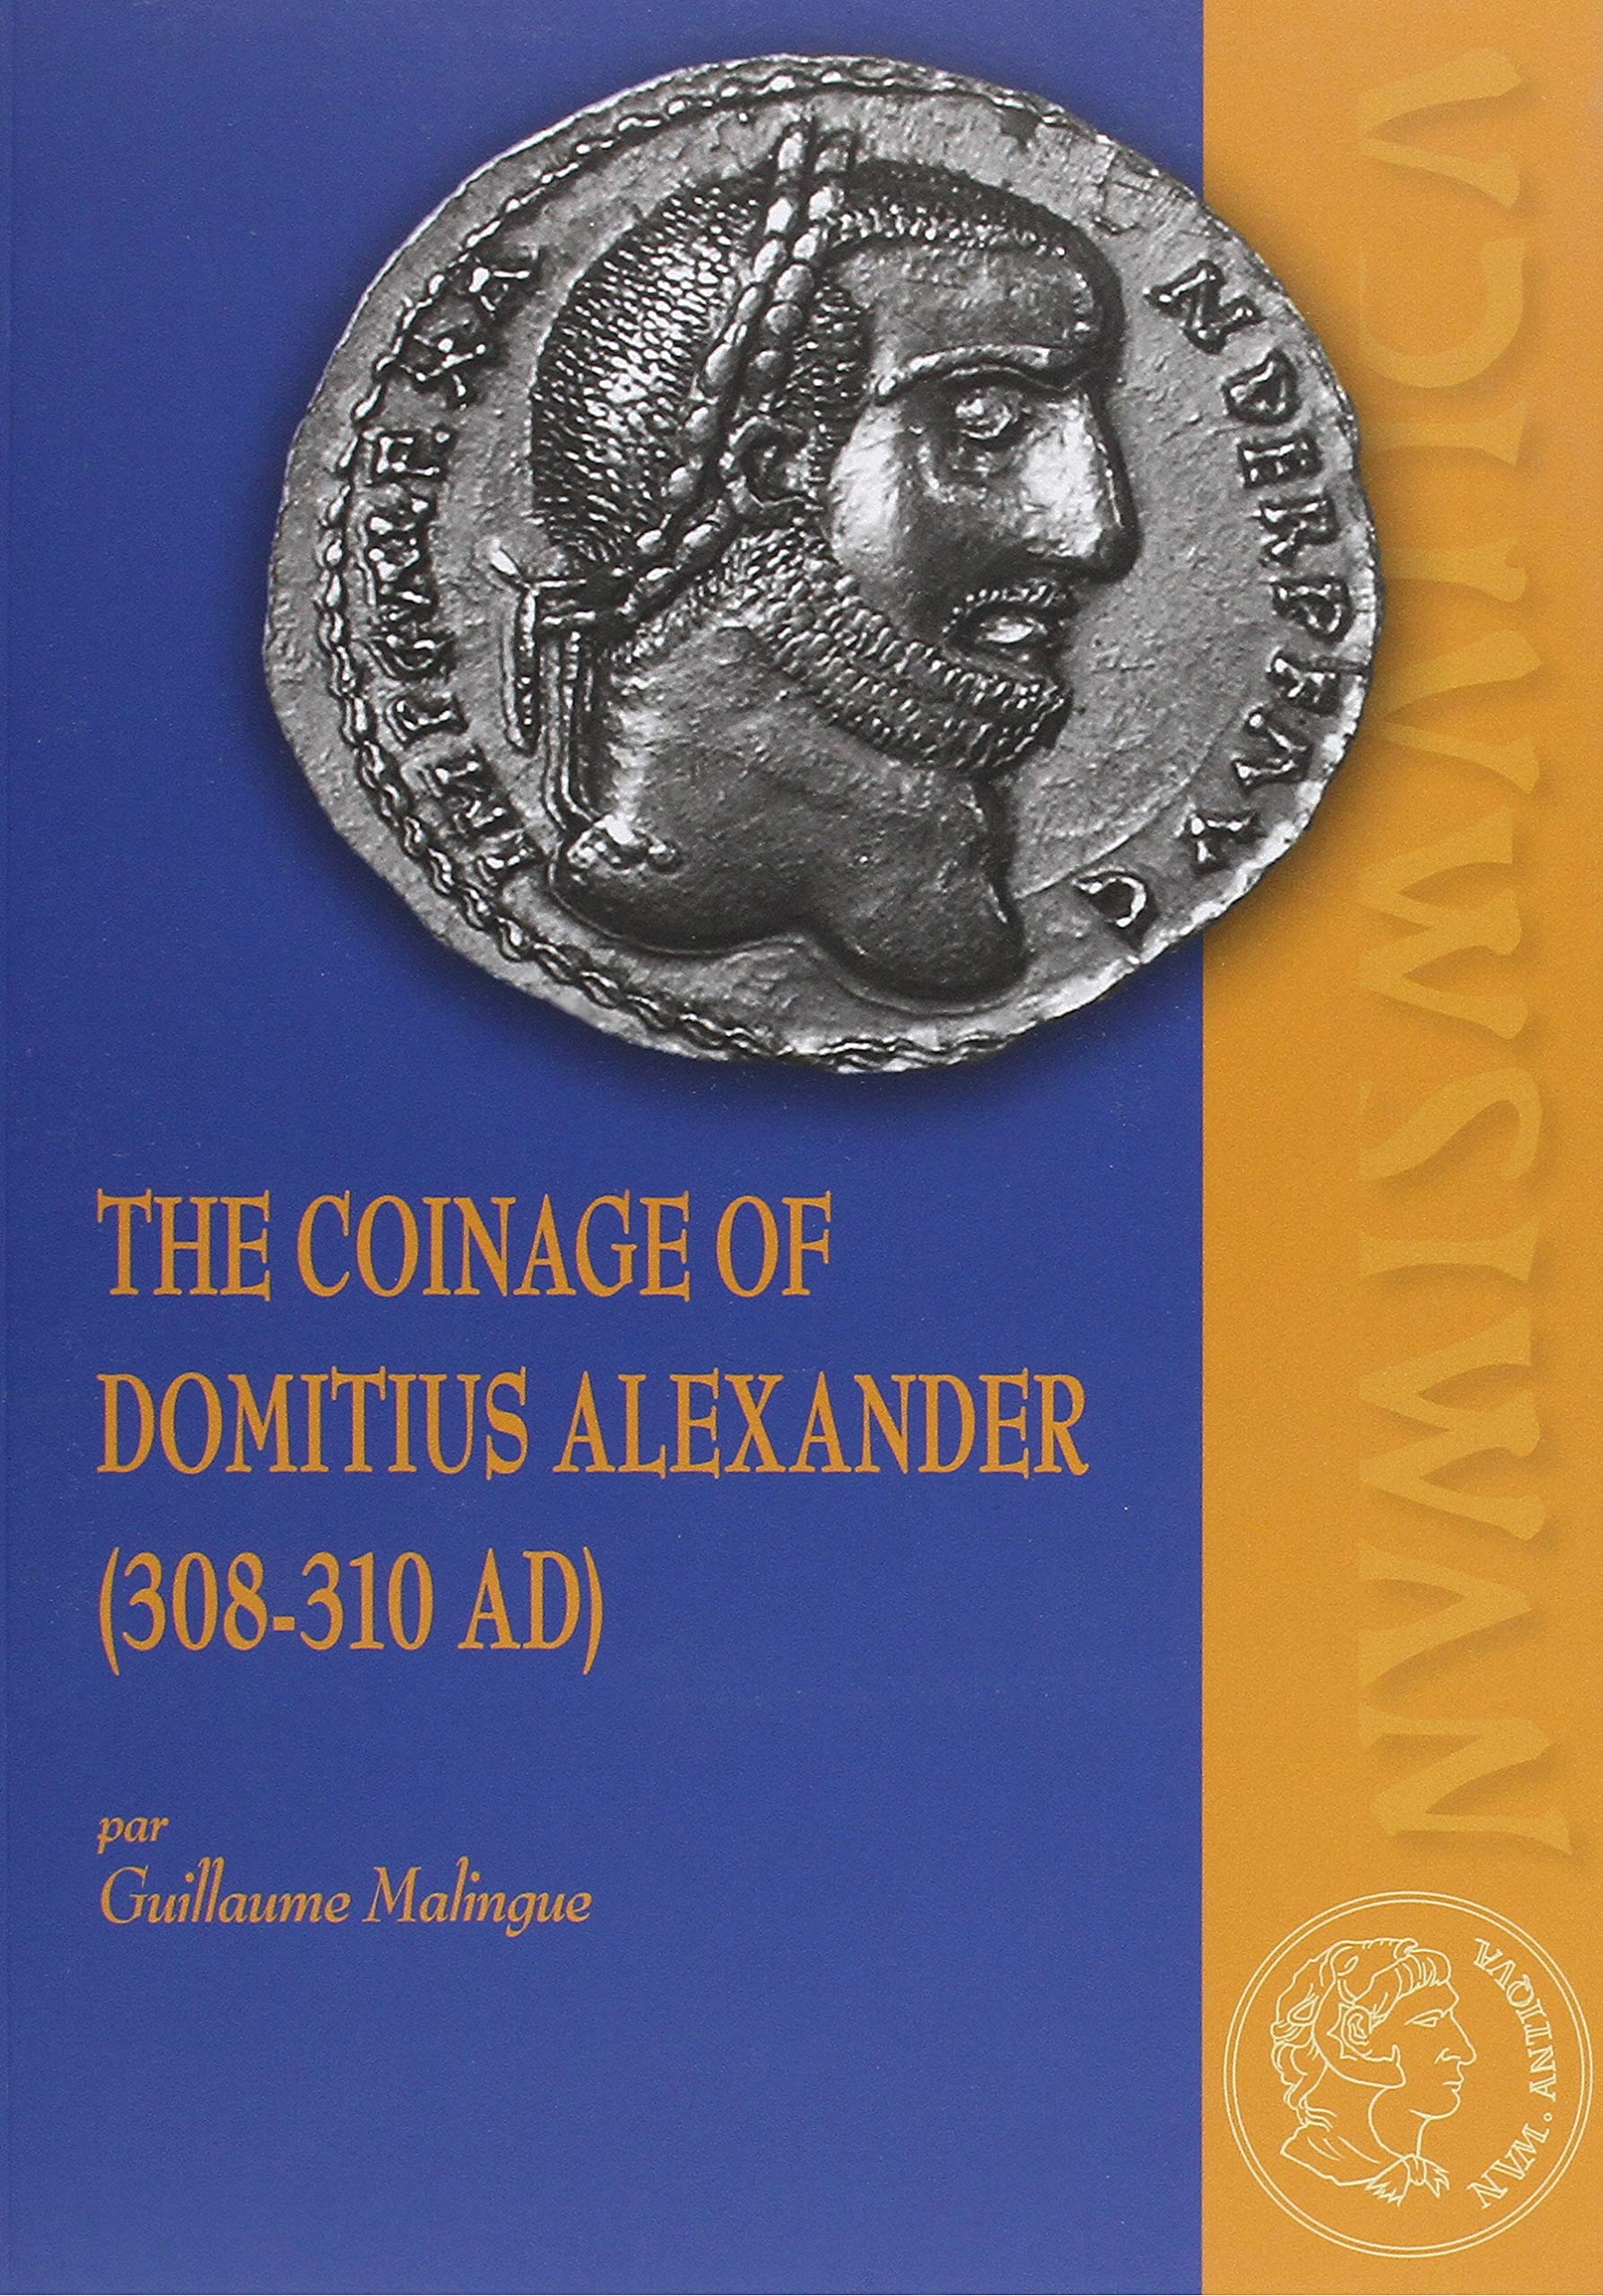 The Coinage of Domitius Alexander (308-310 AD), 2018, 172 p.